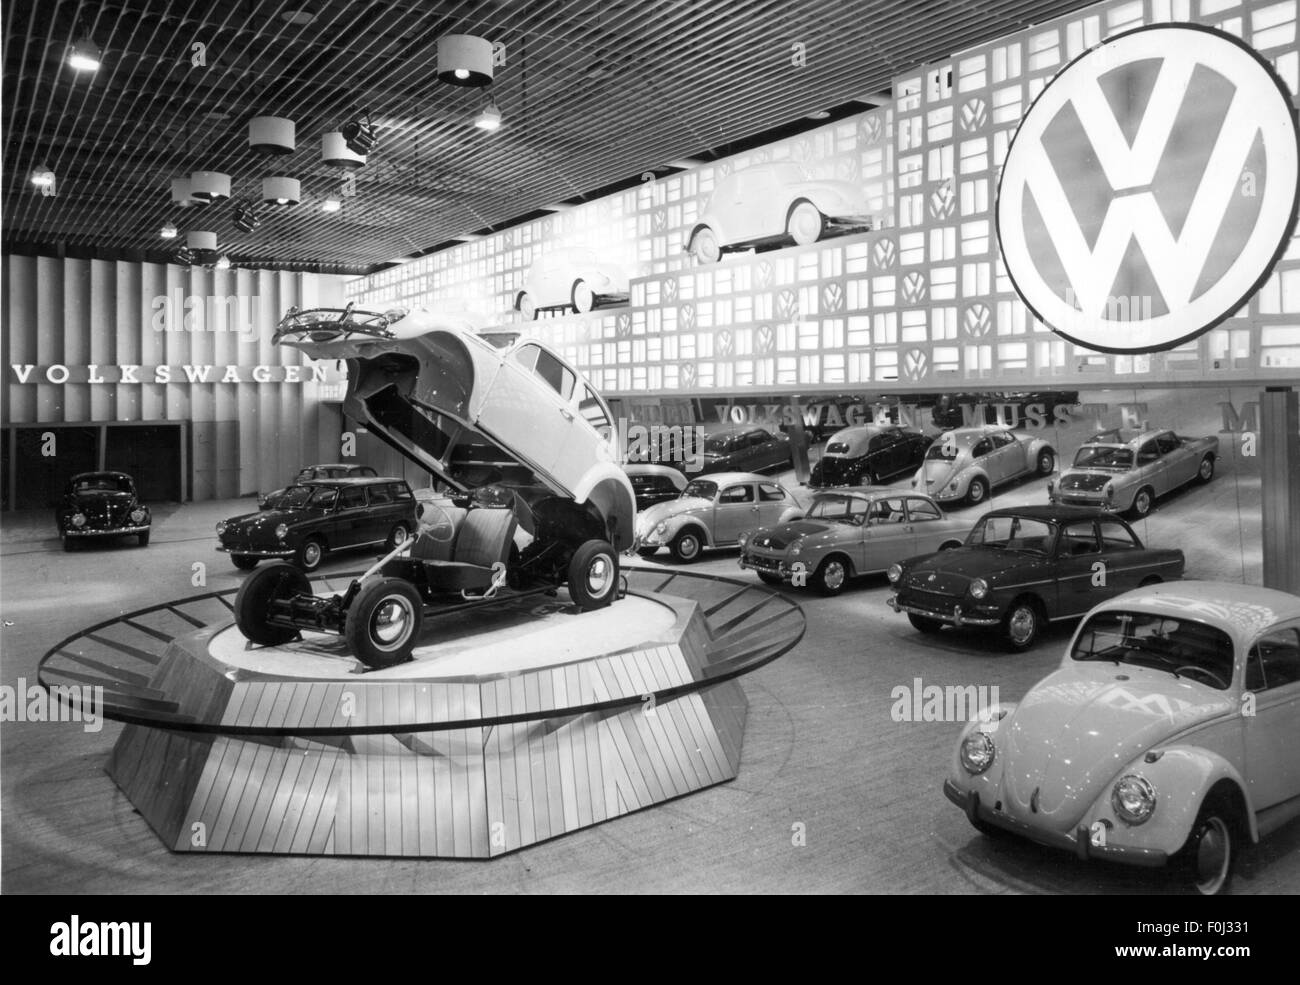 transport / transportation,motor shows,Frankfurt Motor Show(IAA),Volkswagen booth,hall 9,fairground,Frankfurt,1963,20th century,1960s,60s,Germany,motor car,auto,passenger car,motorcar,motorcars,autos,passenger cars,cars,car,autocar,automobile,autocars,automobiles,power-driven vehicle,motor vehicle,motor vehicles,driving machine,vehicle,vehicles,transport,transportation,mobility,fair,trade show,motor show,VW beetle,trademark,trademarks,hall,halls,trade-show booth,booths,stands,stand,exhibitions,exhibition,industry,Additional-Rights-Clearences-Not Available Stock Photo